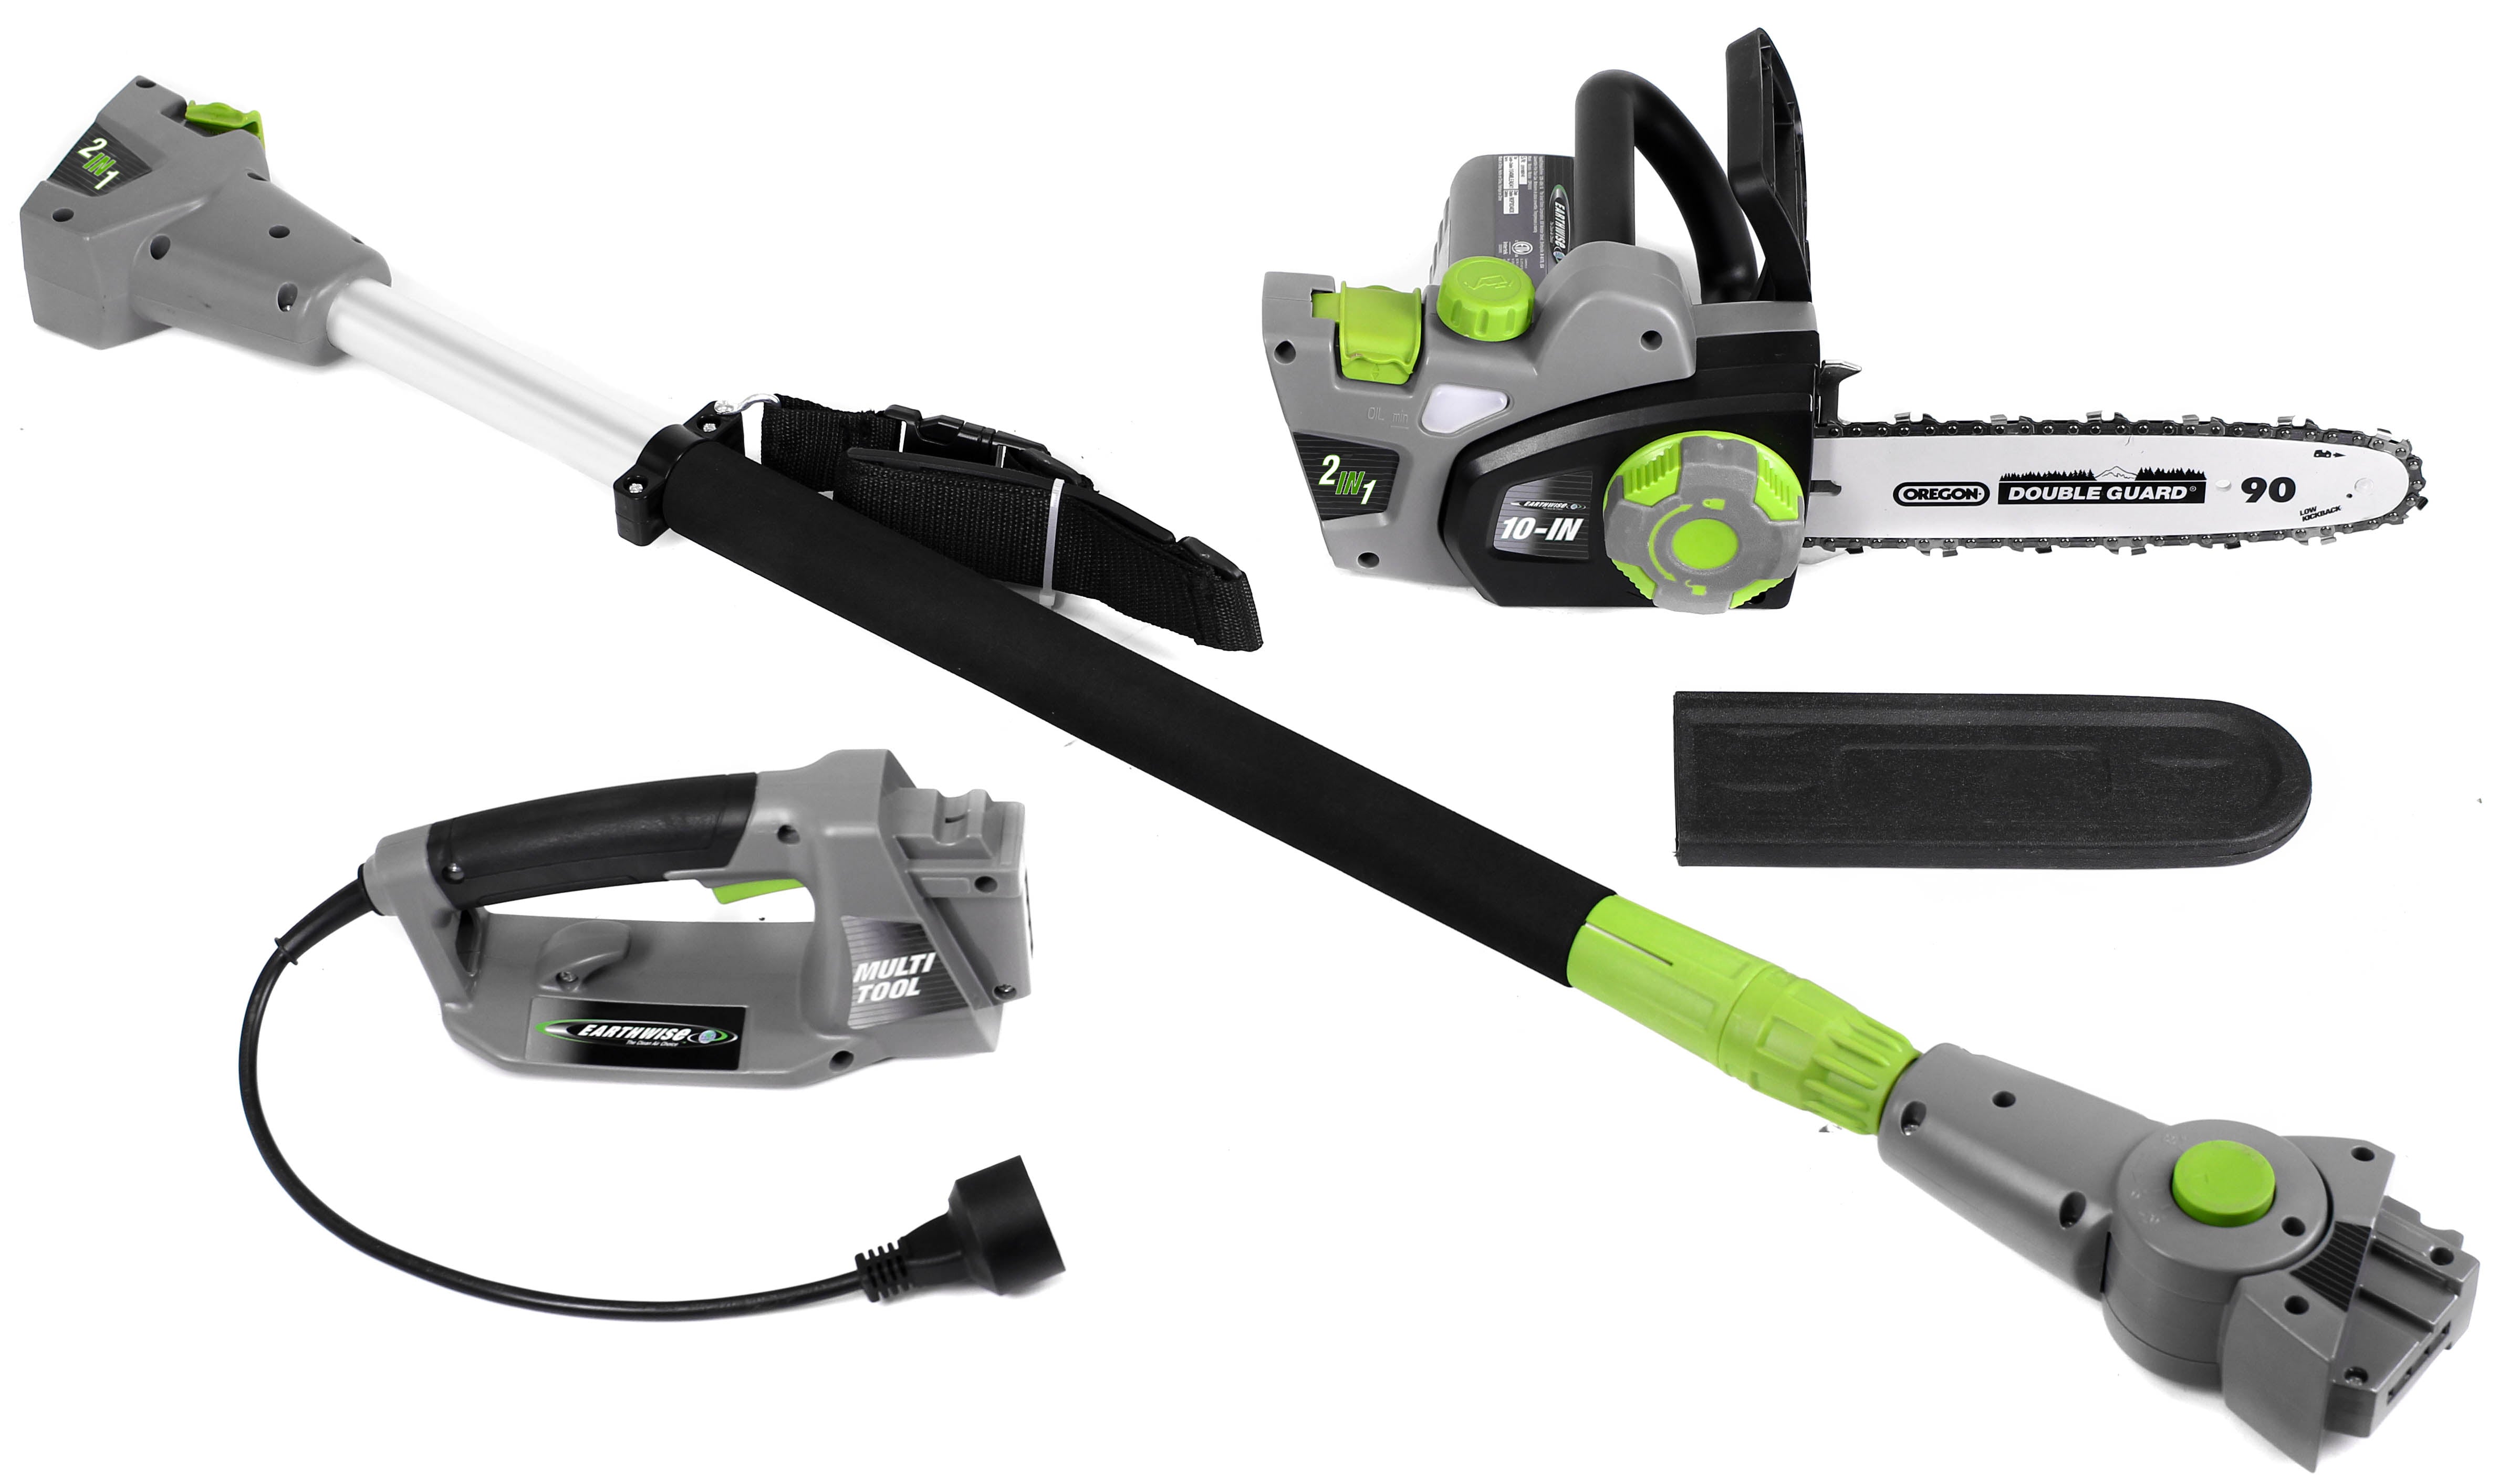 Earthwise Power Tools by ALM 10" 7-Amp 120V Corded 2 in 1 Pole Saw